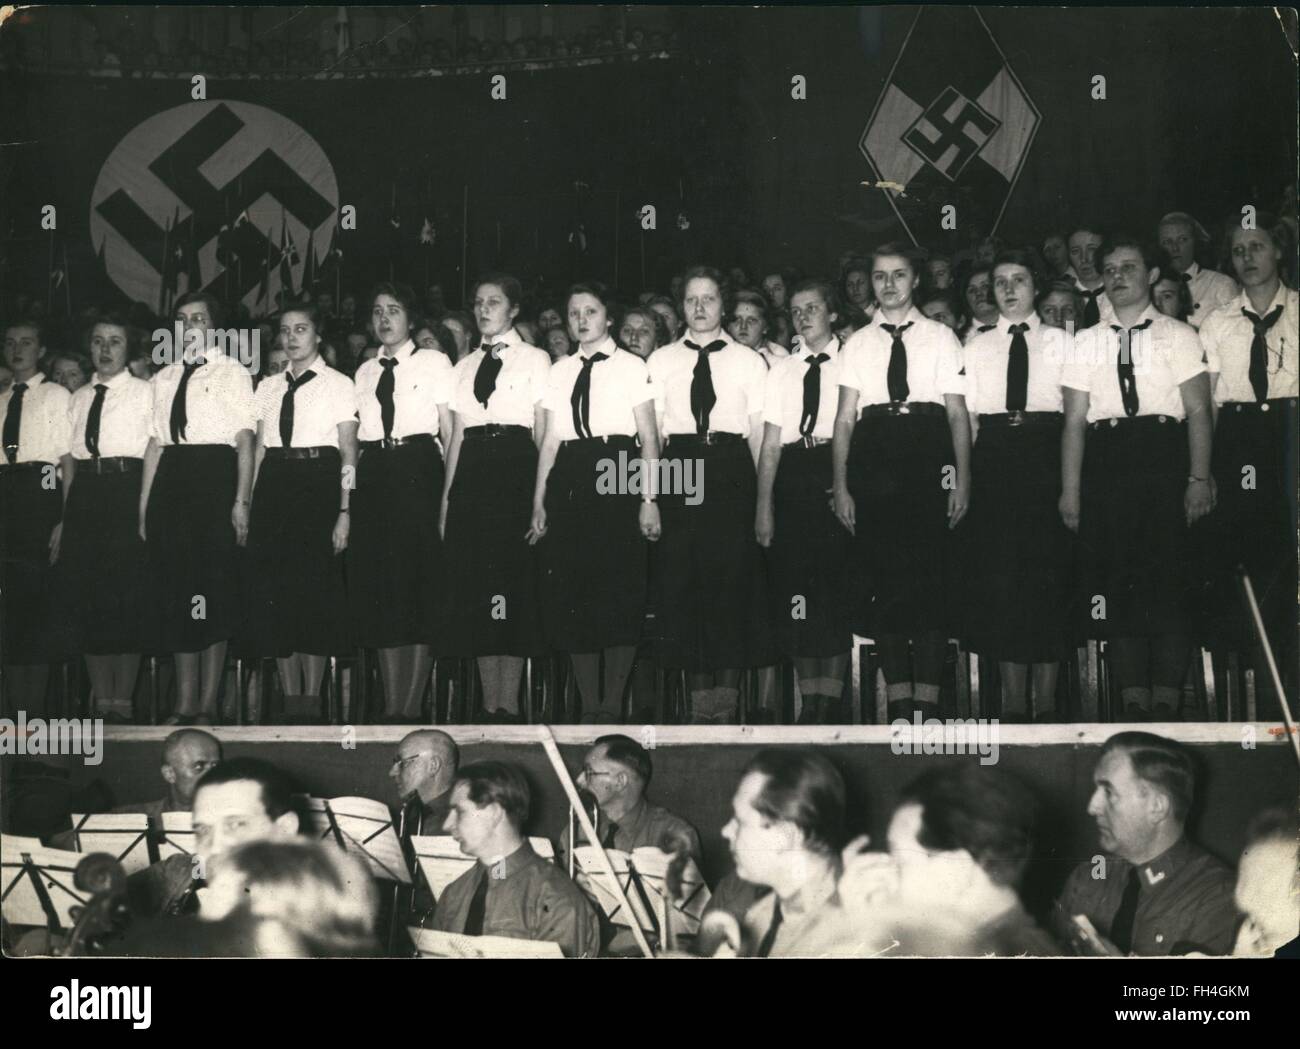 1935 - Nazi Giant Hitler Girl's Parade!: On Feb 10.35, a big Hitler Girls' Parade took place at the Sportpalast of Berlin. Photo shows a moment of the girls' parade. © Keystone Pictures USA/ZUMAPRESS.com/Alamy Live News Stock Photo